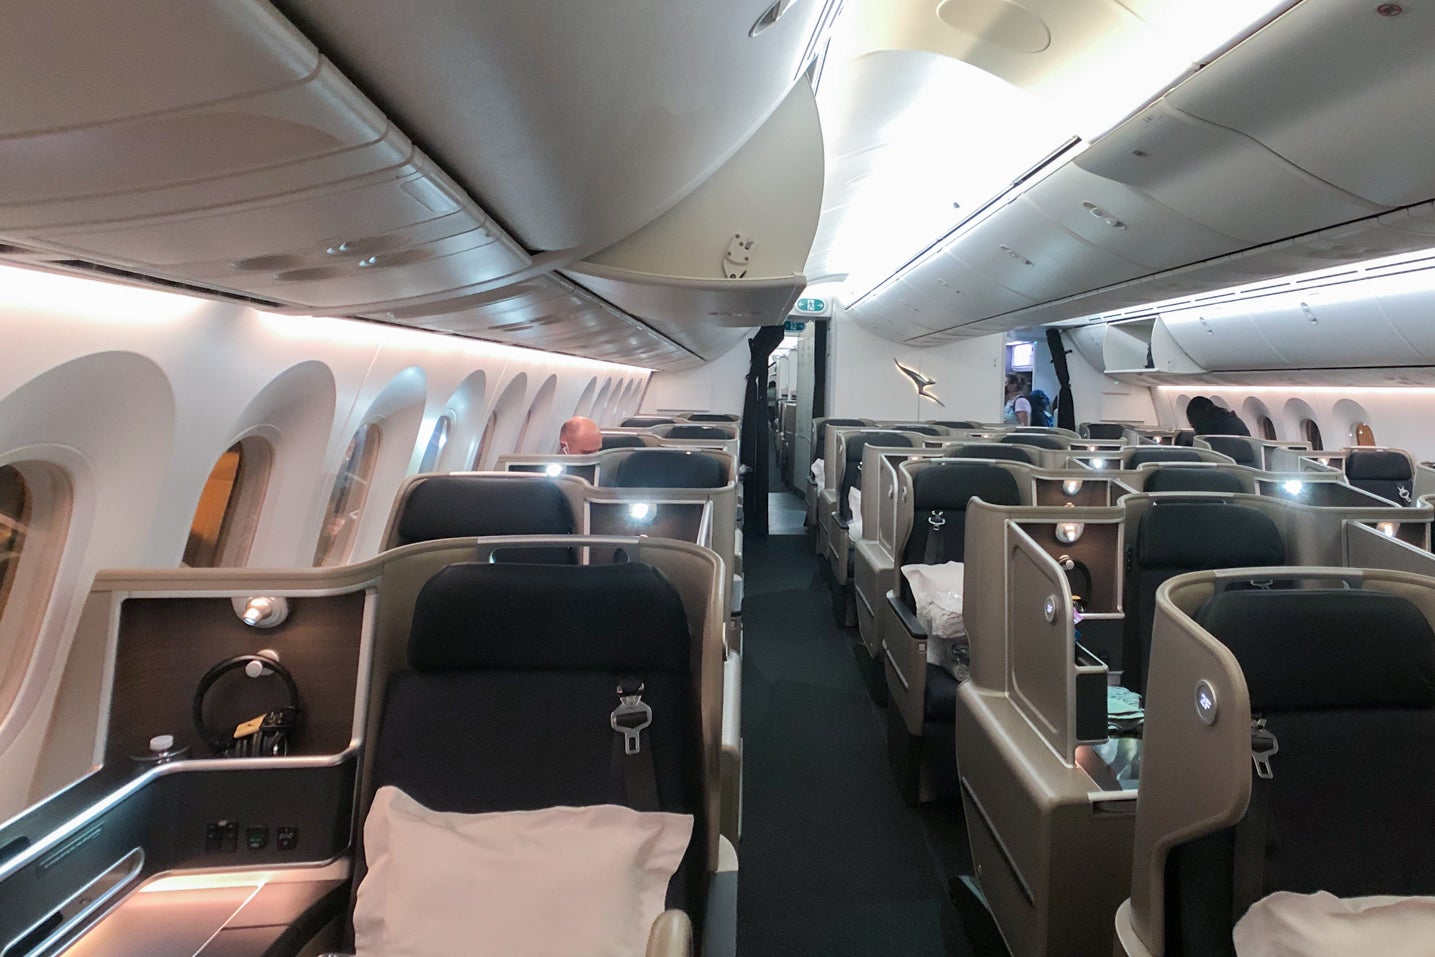 A perfect hop across the Pacific: Qantas 787 business class - The ...